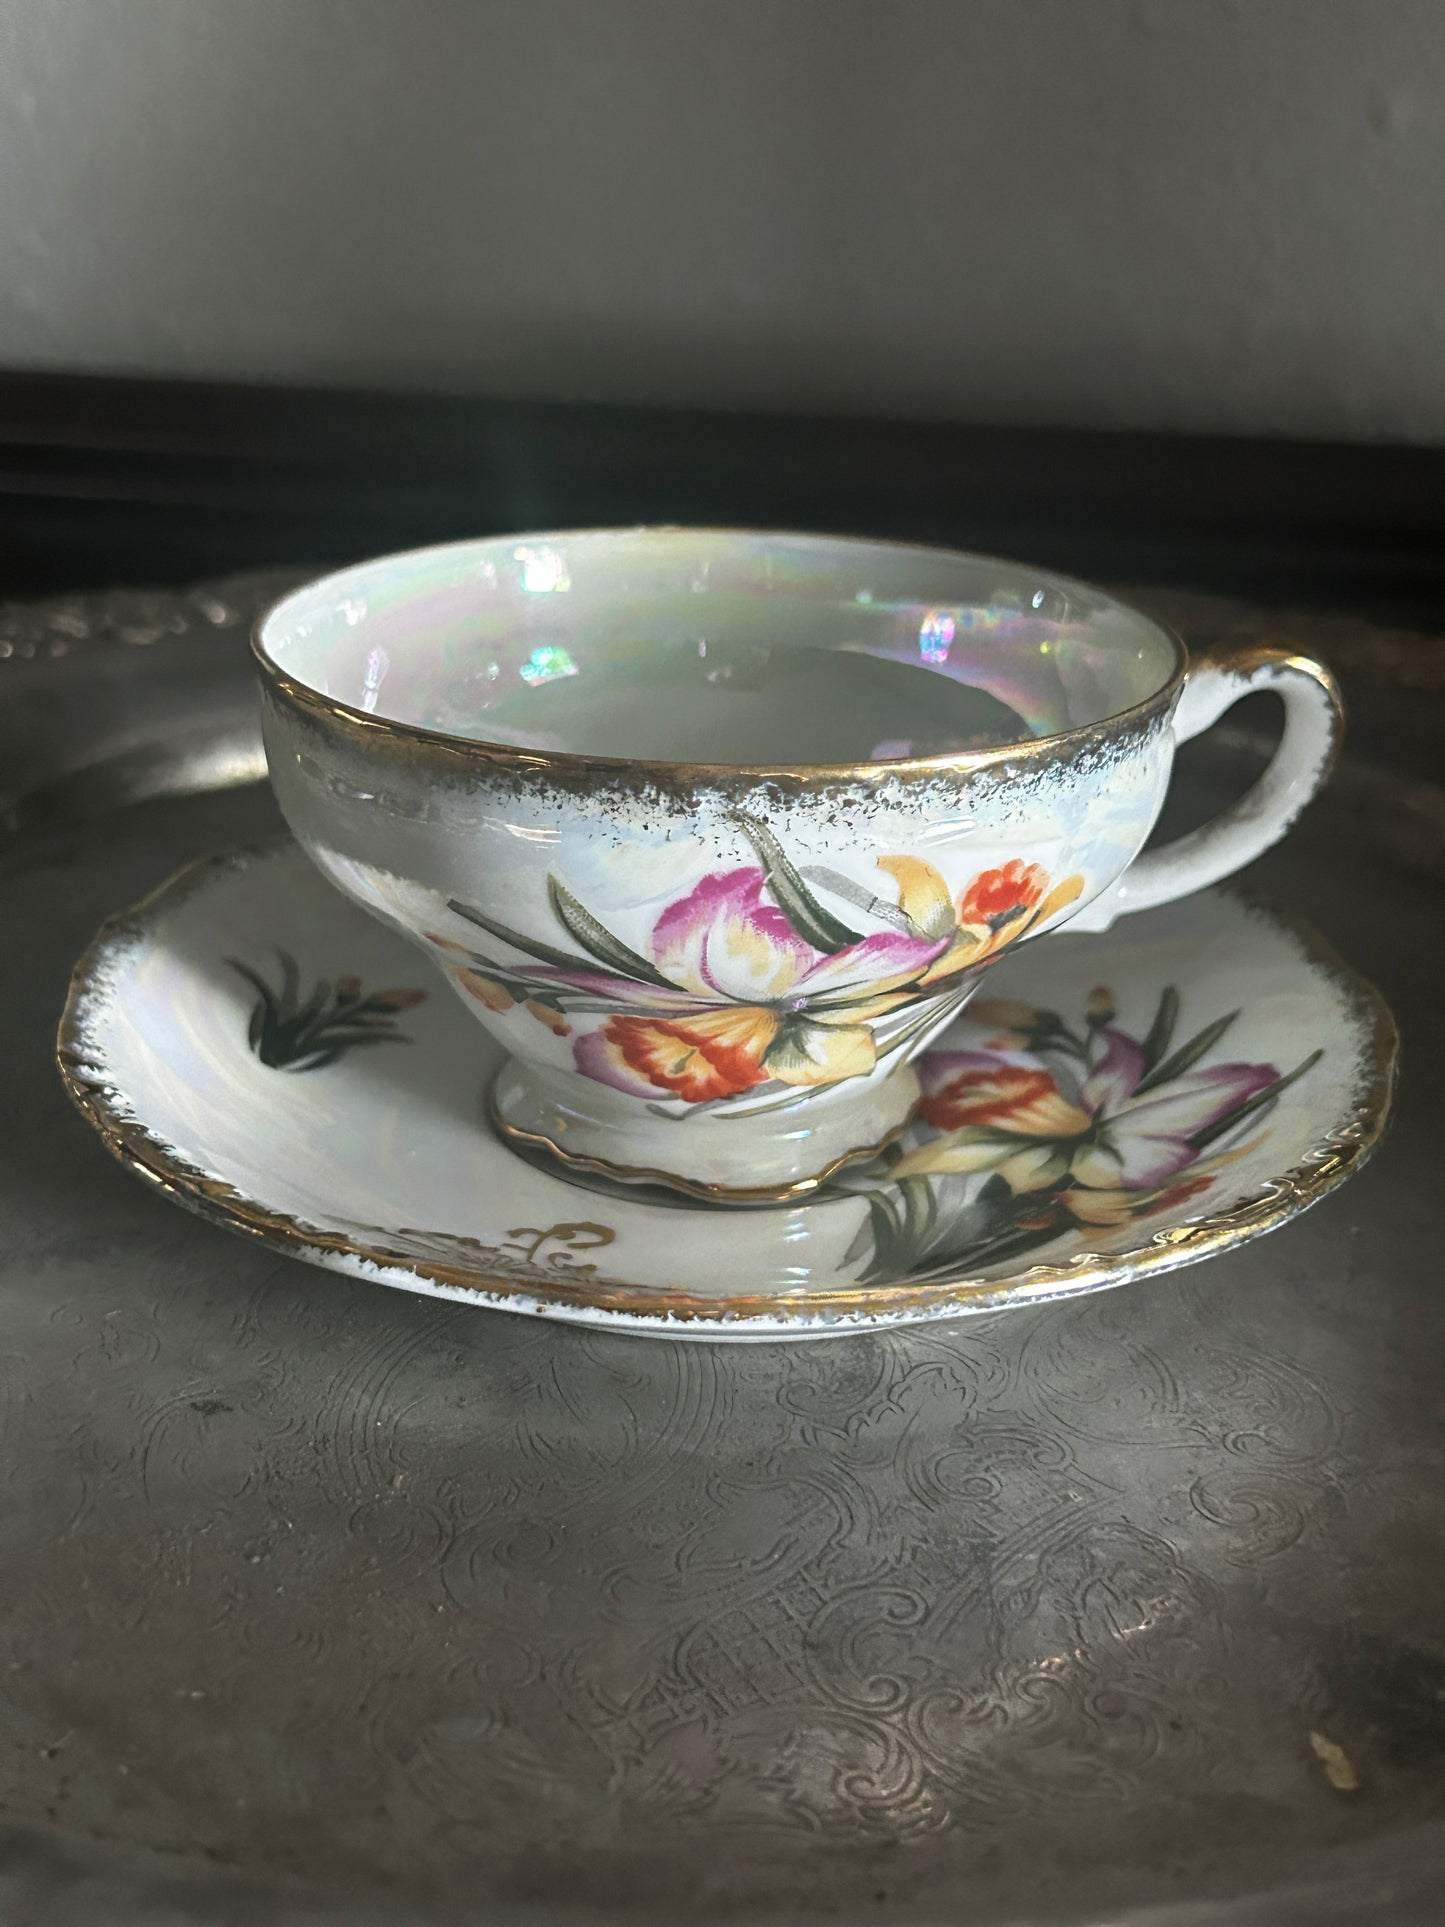 Daffodil Floral Bouquet Tea Cup and Saucer